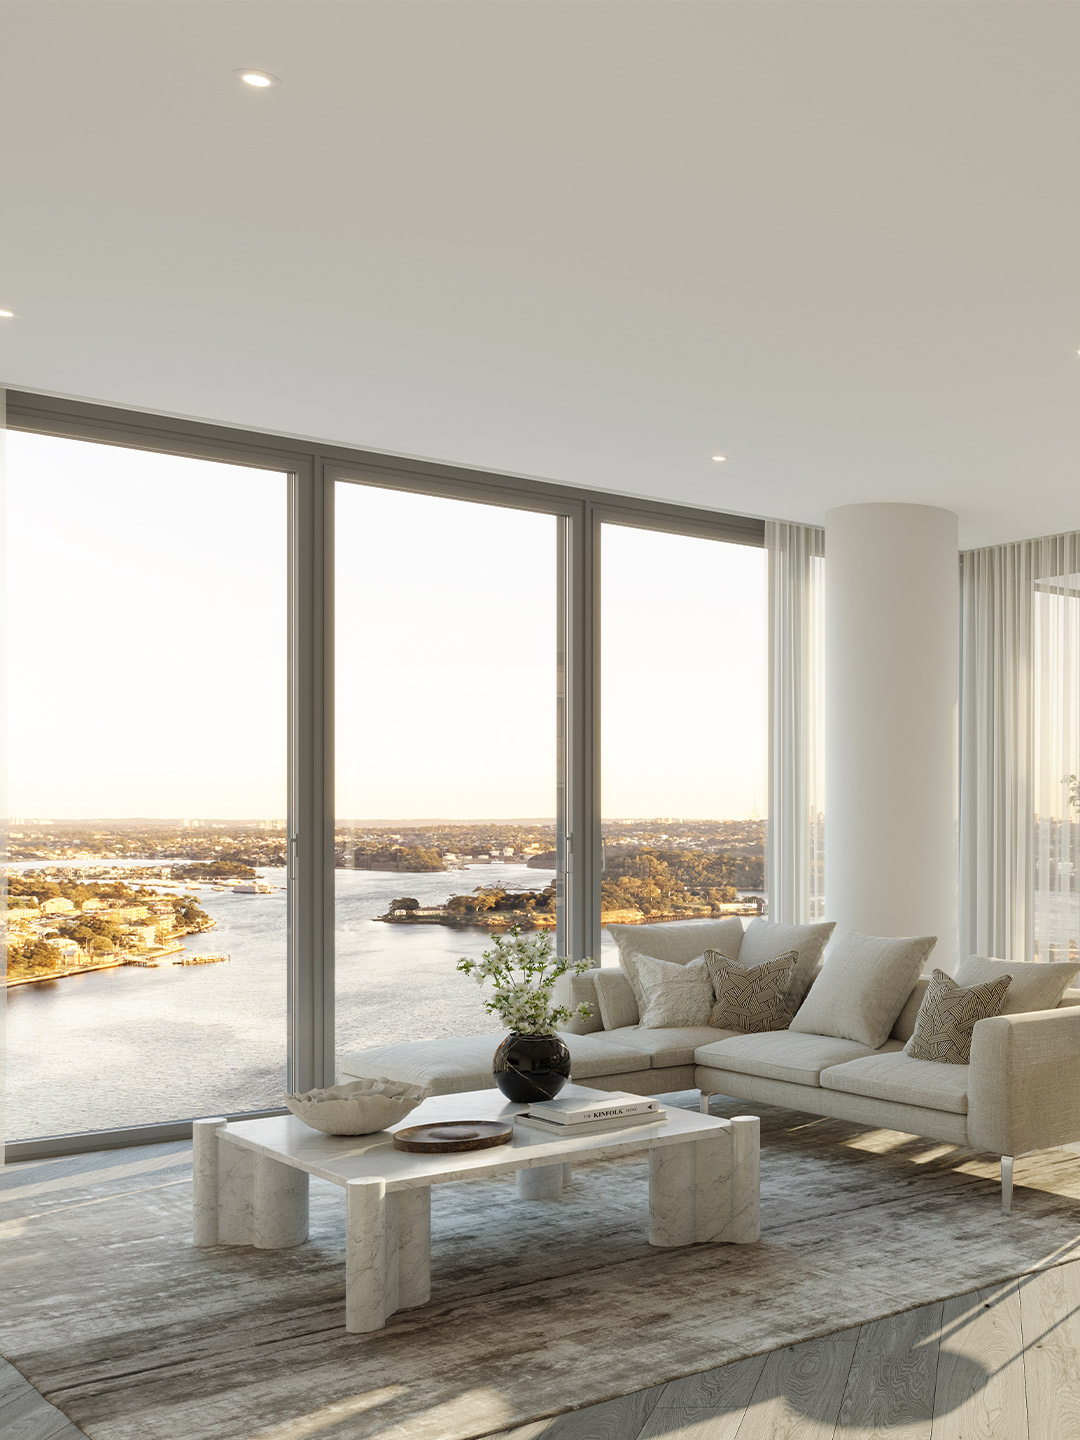 Watermans Residences at One Sydney Harbour by Lendlease and Renzo Piano, Sydney, Australia. 